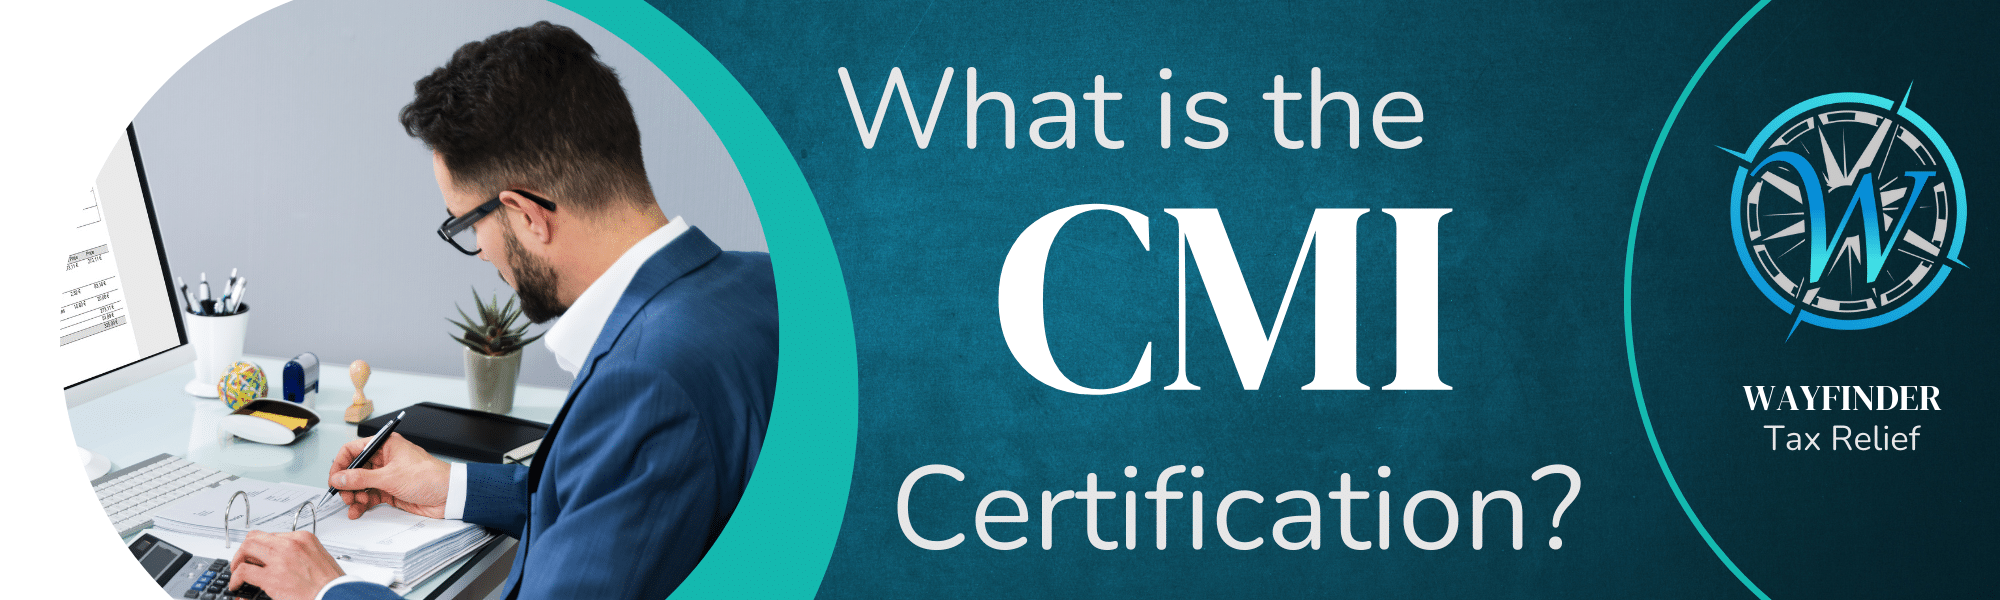 What is a CMI Certification?